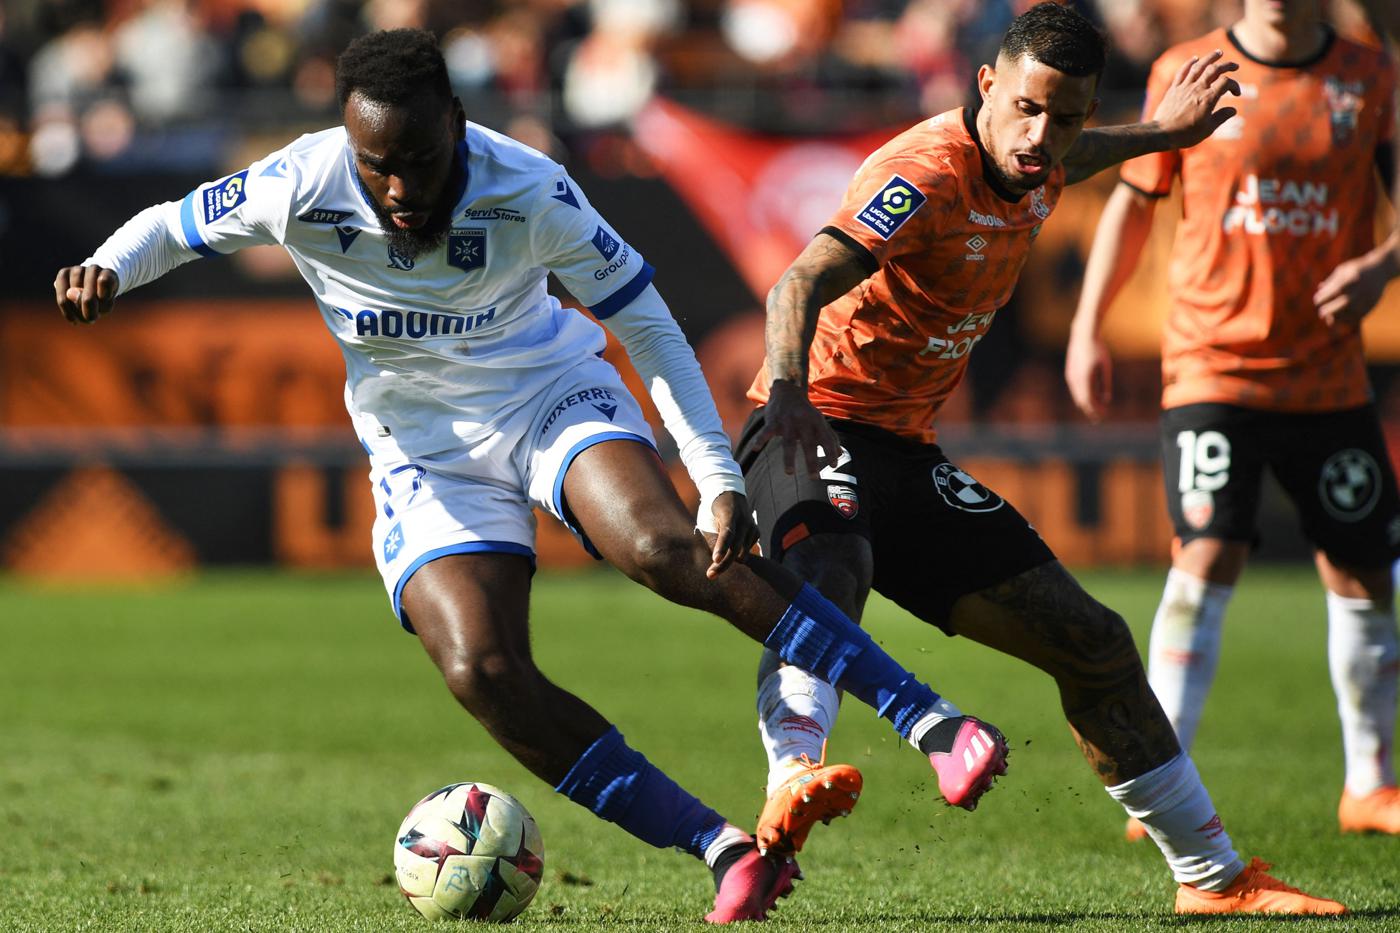 Lorient - Auxerre - 0-1. French Championship, 25th round. Match review, statistics